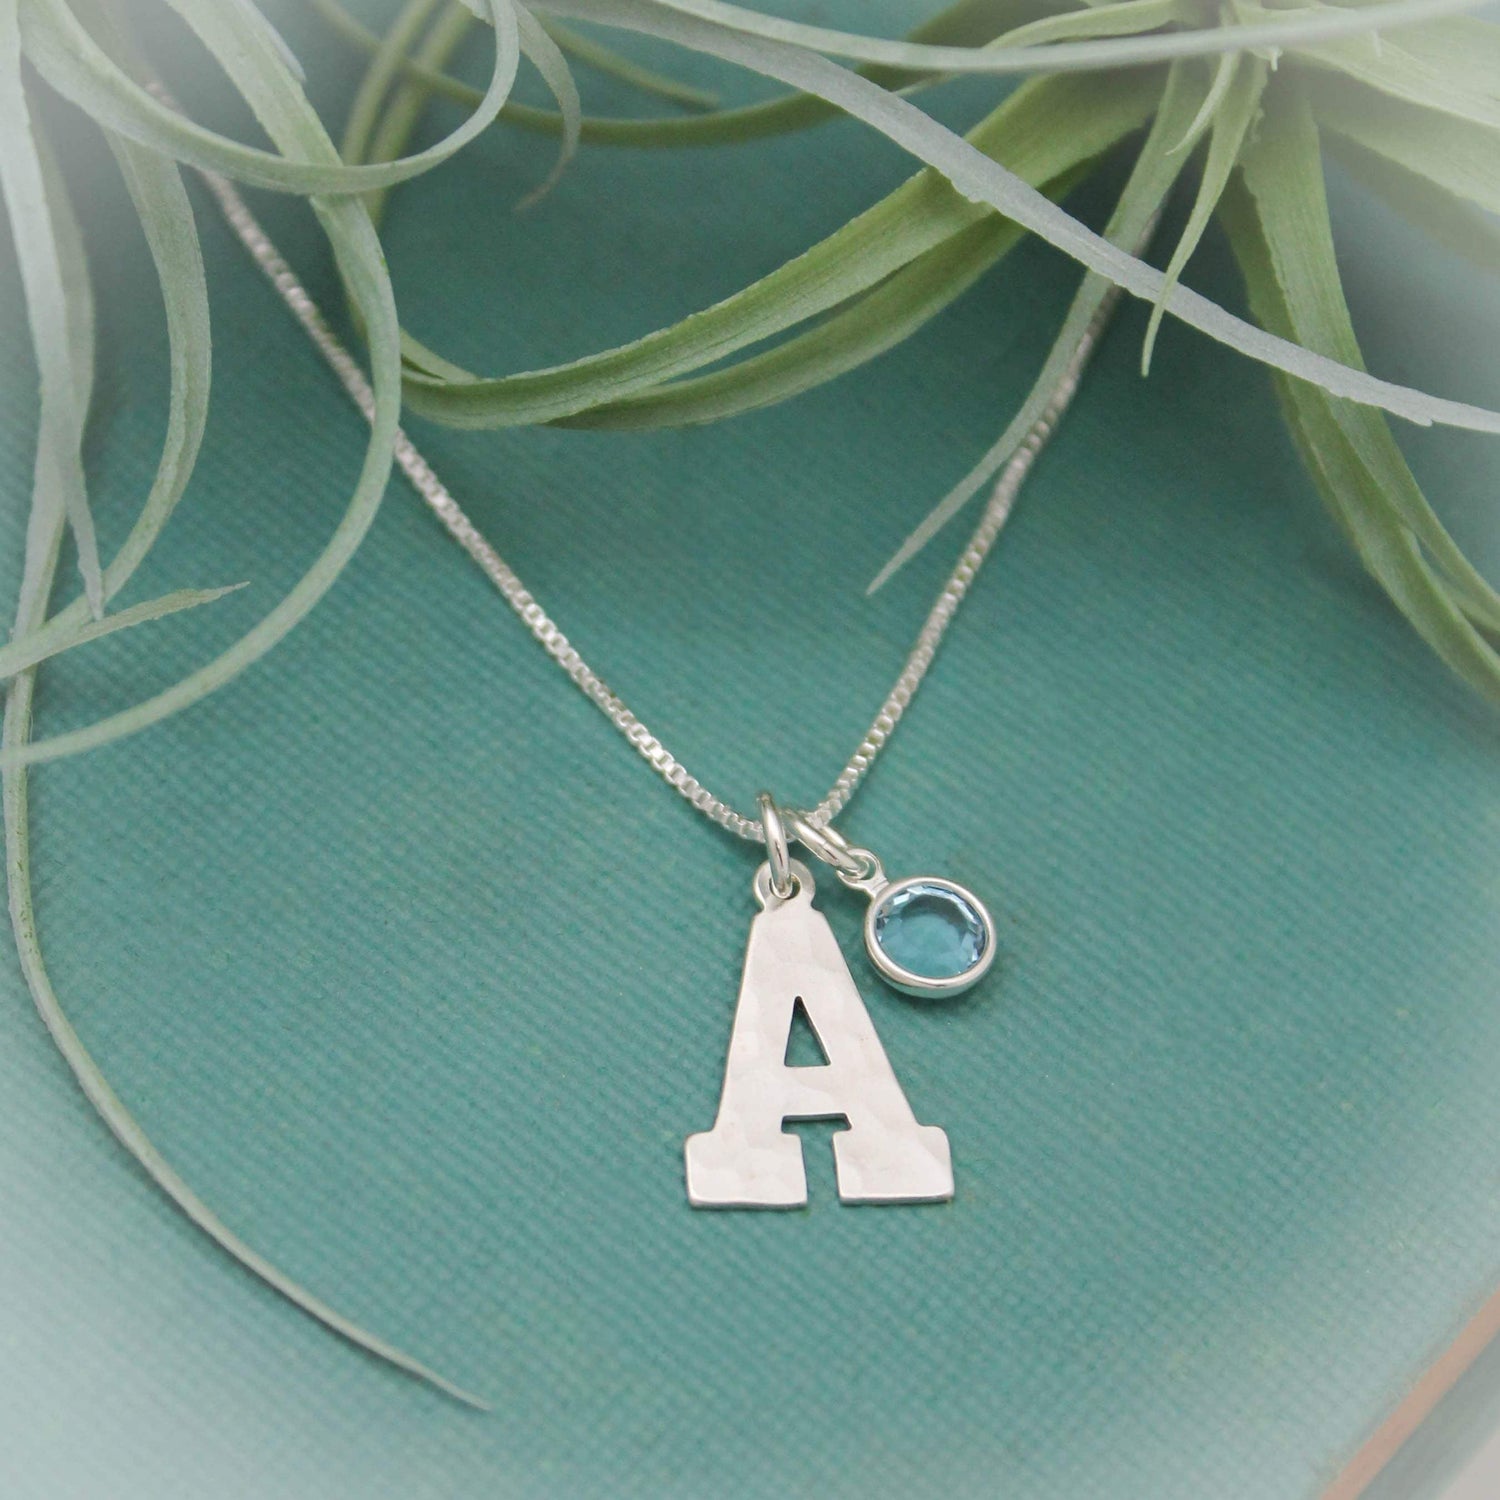 Silver Plated Initial and Birthstone Star Necklace – JOY by Corrine Smith